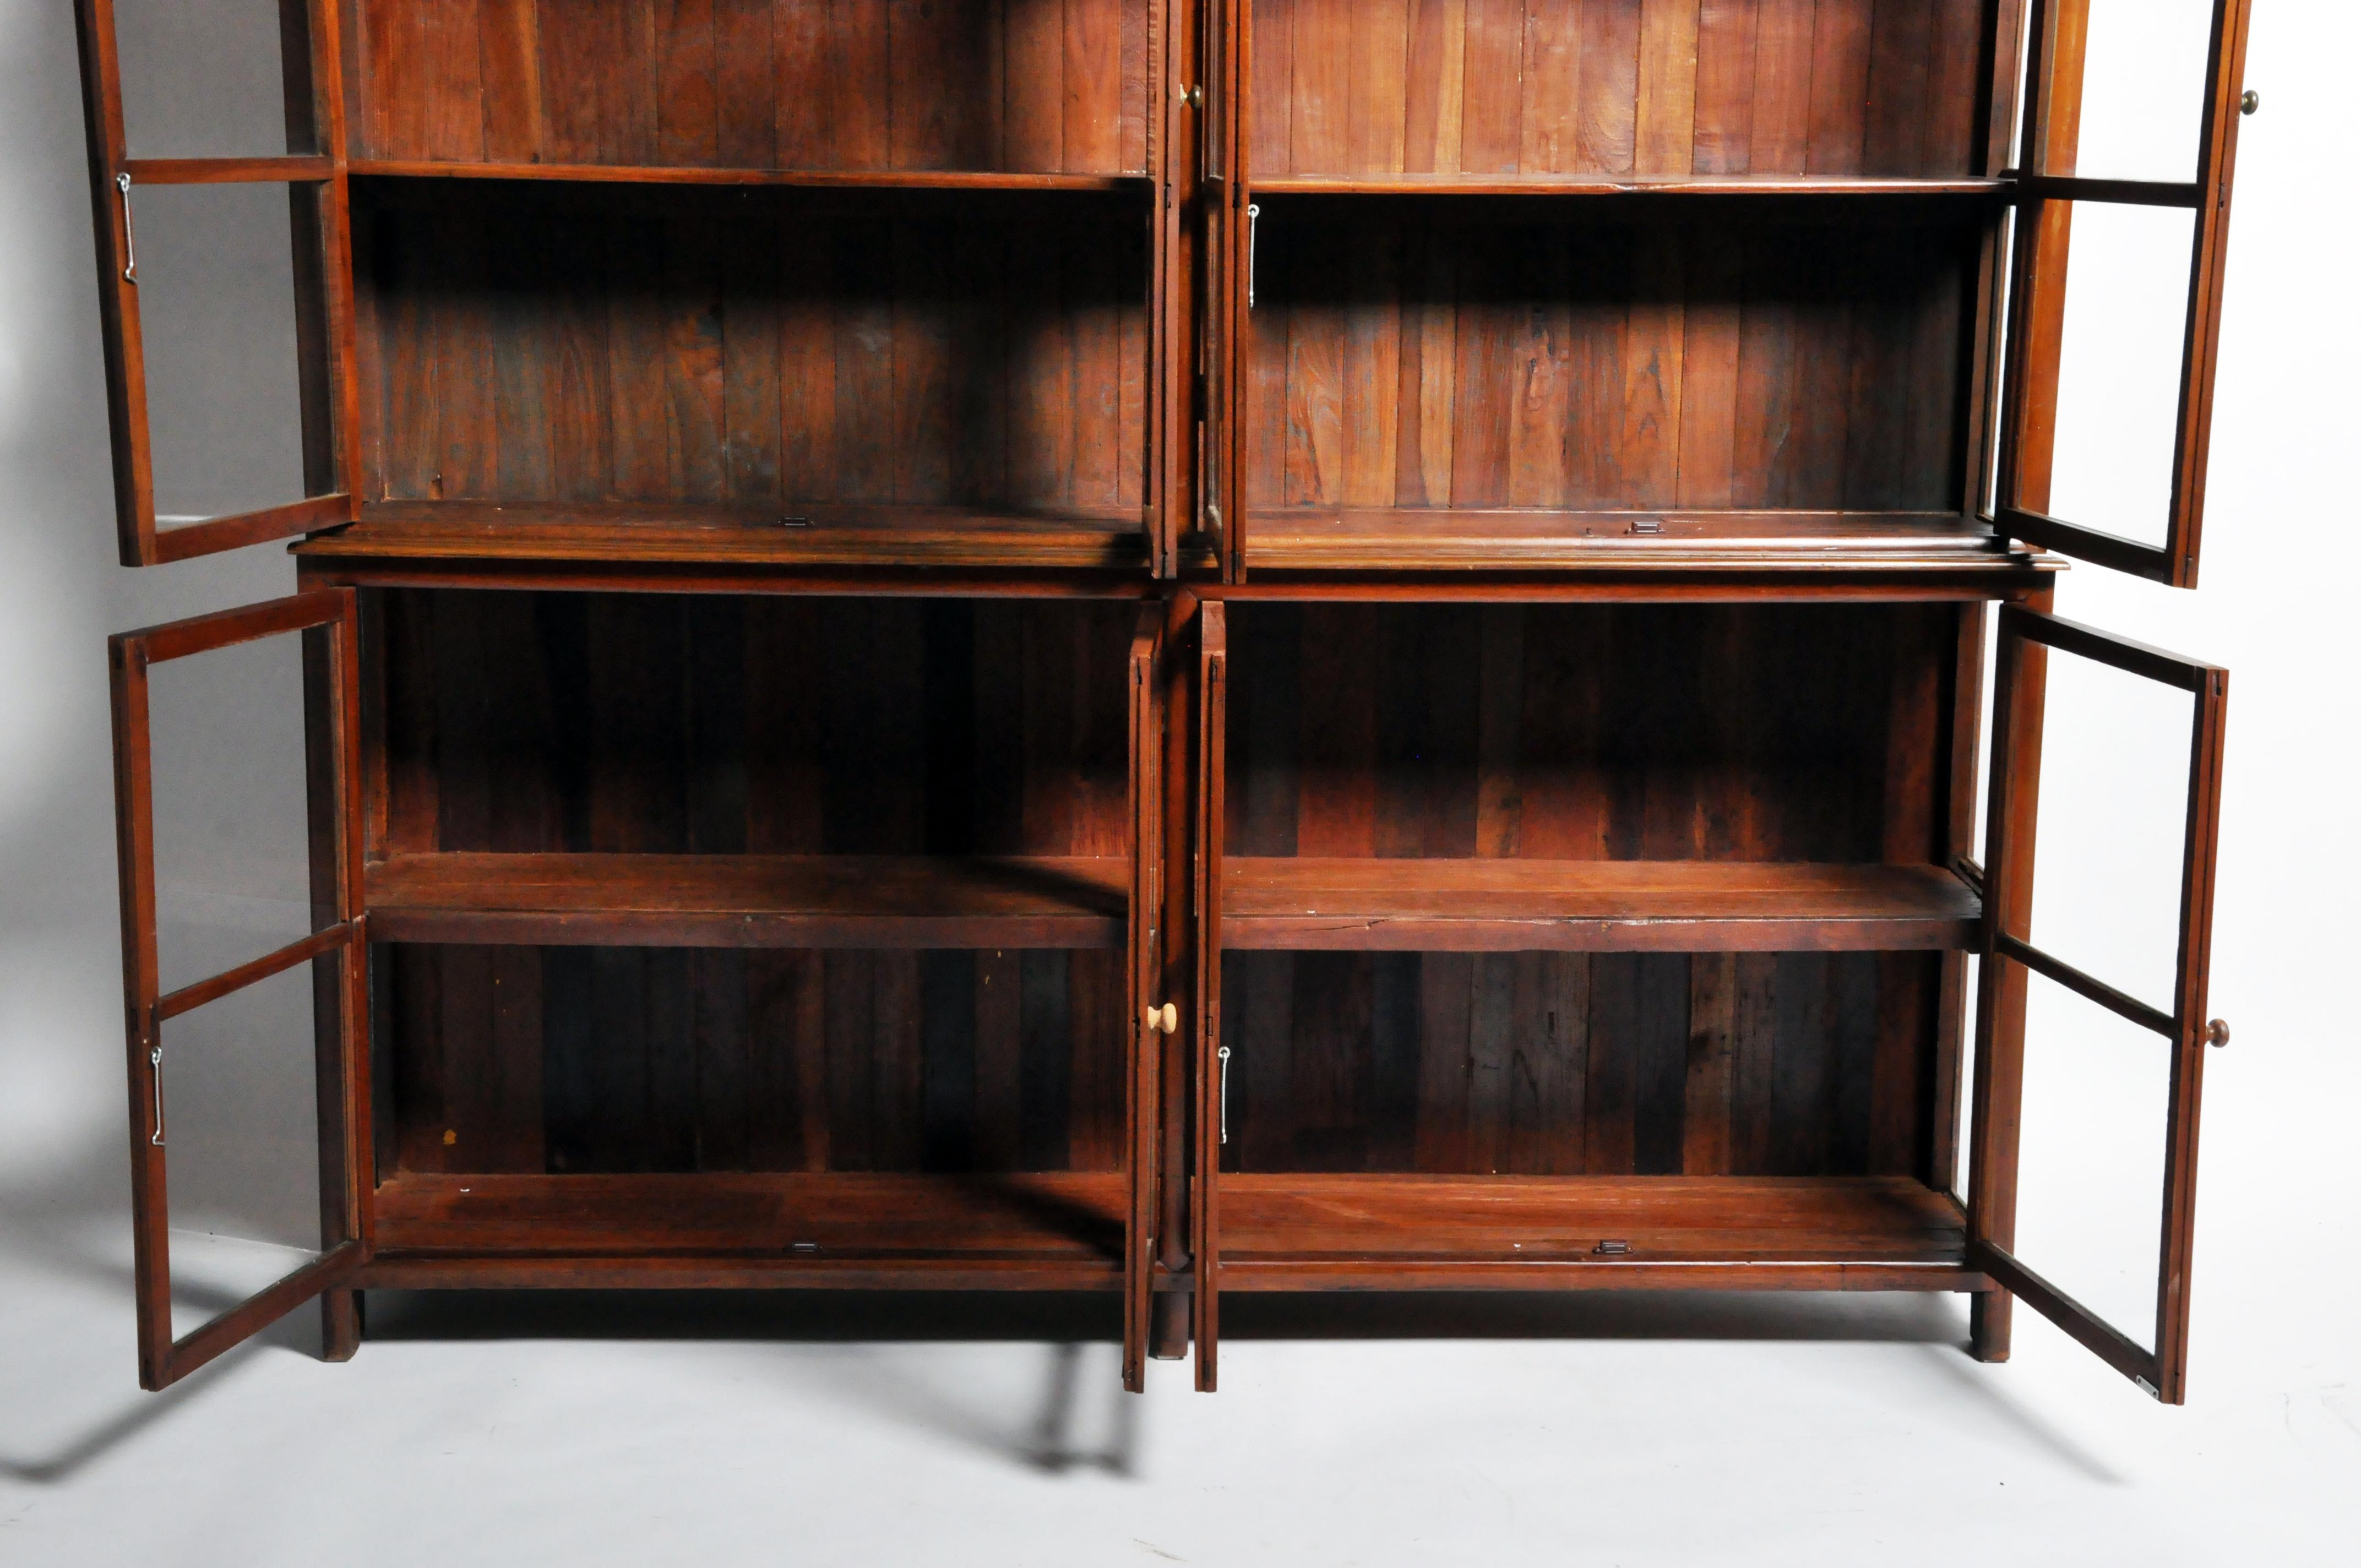 British Colonial Art Deco Breakfront Bookcase with Four Pairs of Doors 7